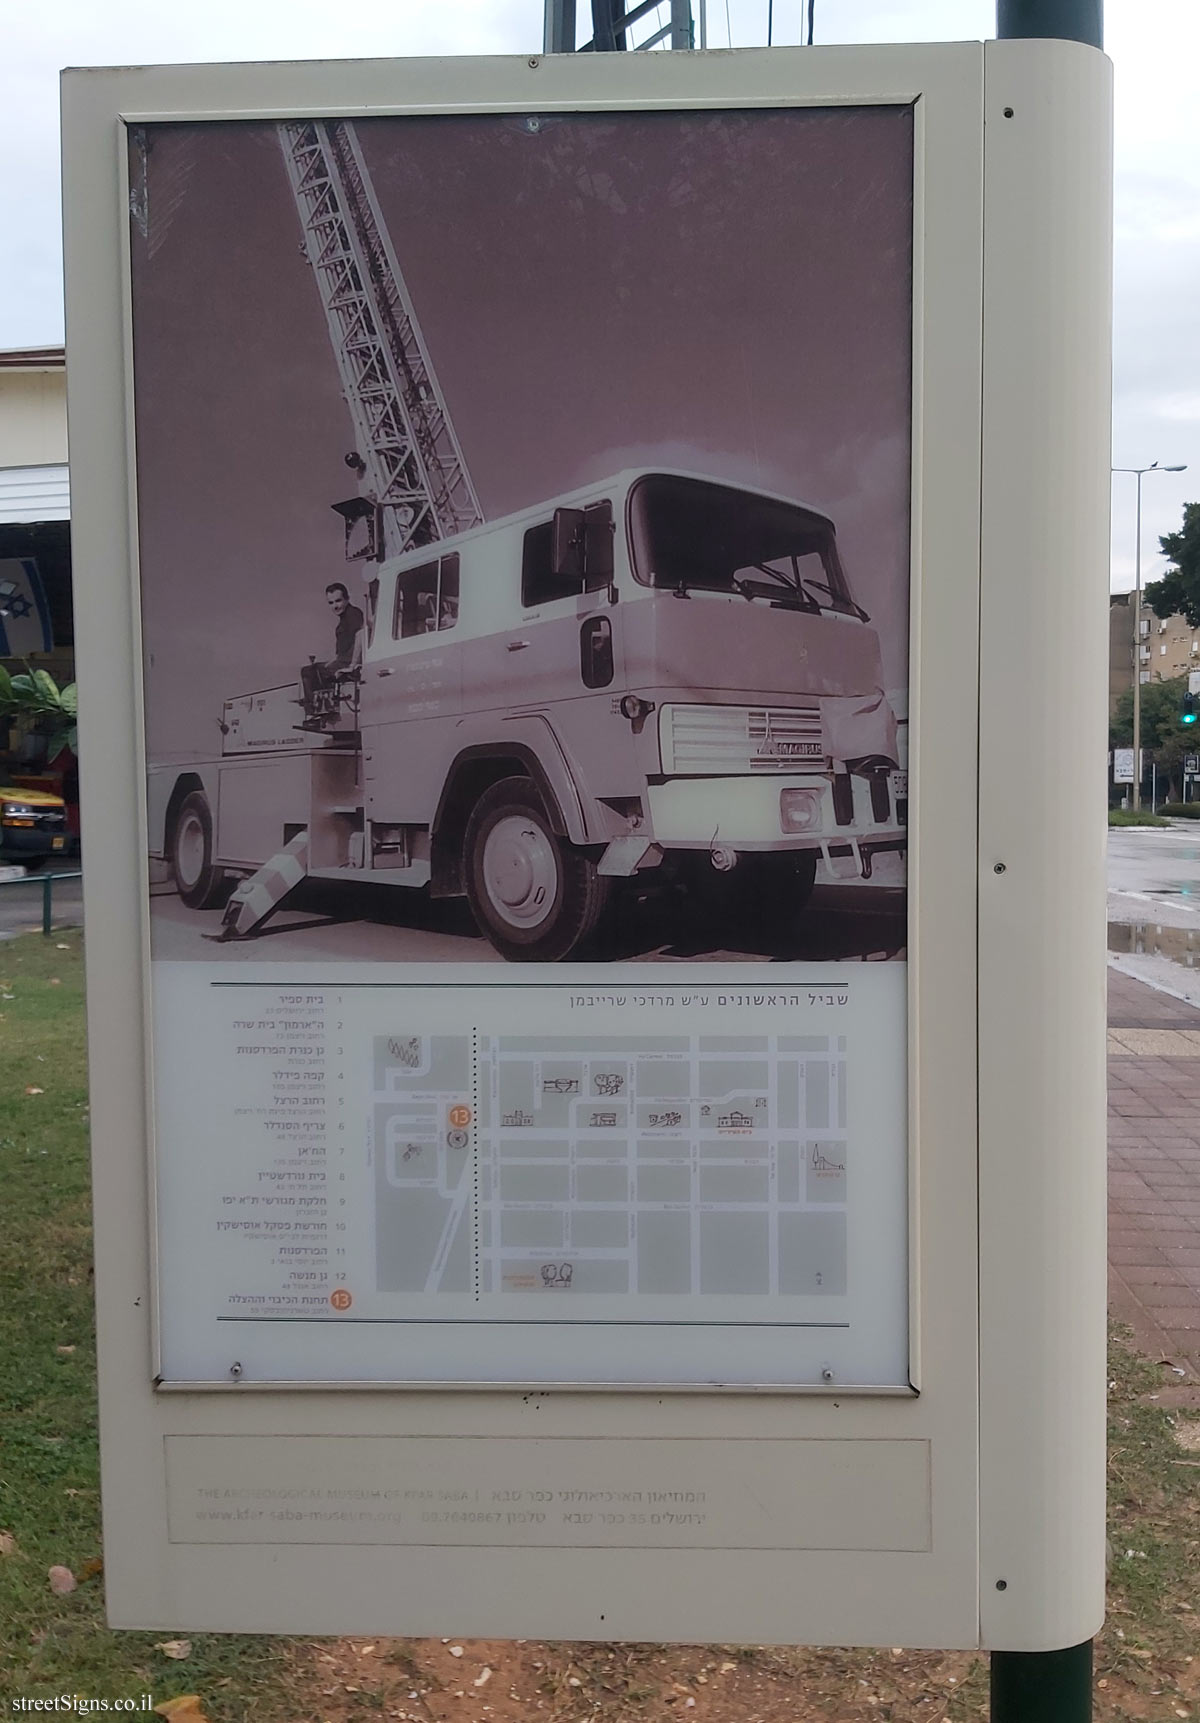 Kfar Saba - The Founders’ Path - Station 13 - The Sharon Municipal Union for Fire and Rescue